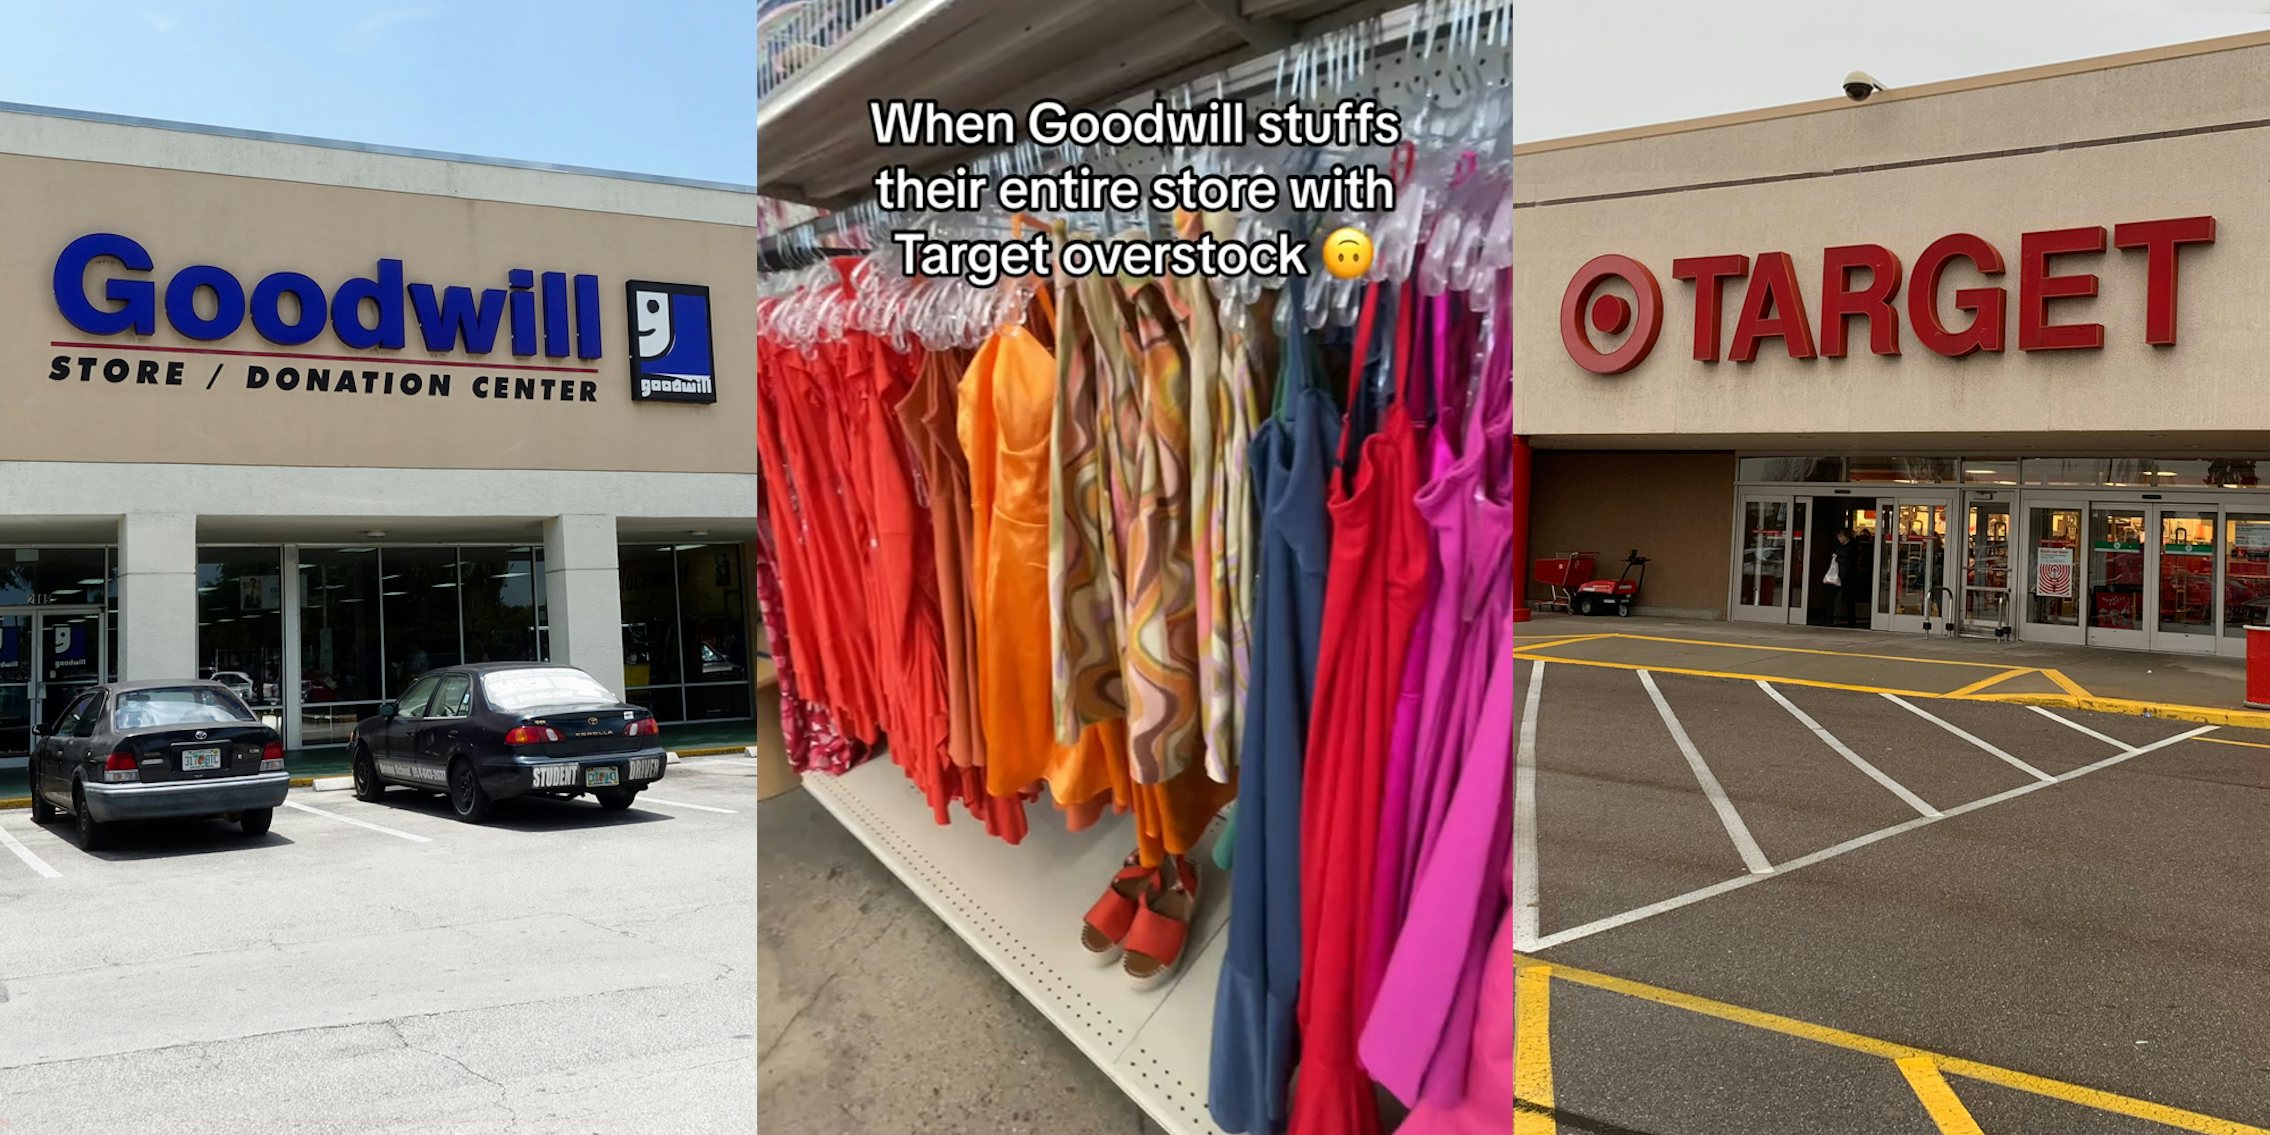 Goodwill building with sign (l) Target apparel hanging on Goodwill rack with caption 'When Goodwill stuffs their entire store with Target overstock' (c) Target building with sign (r)